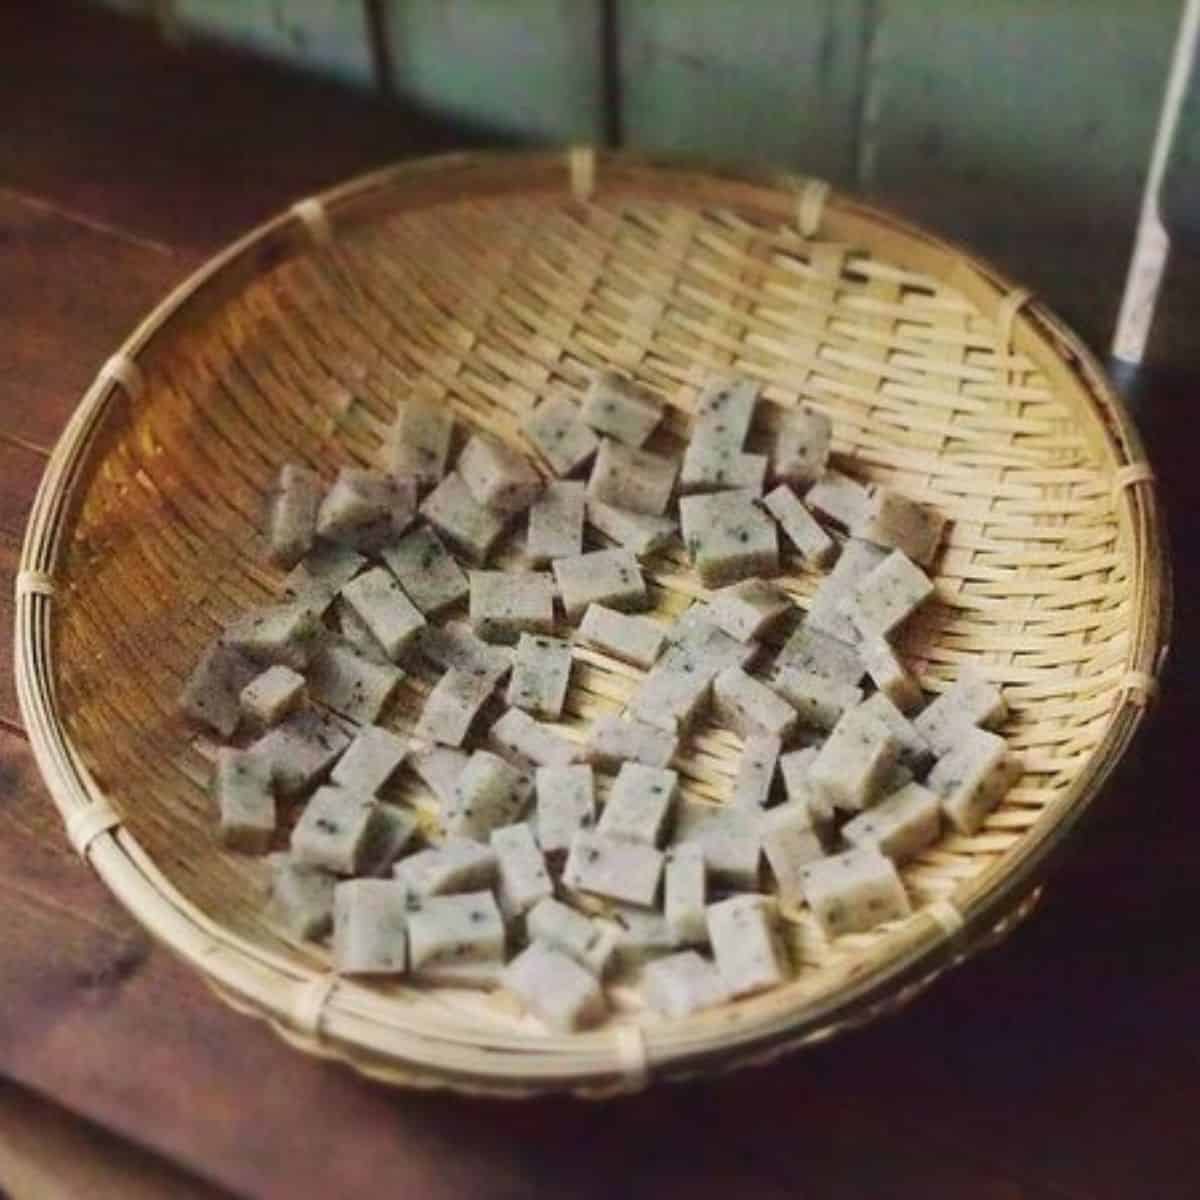 drying the rice crackers to make arare